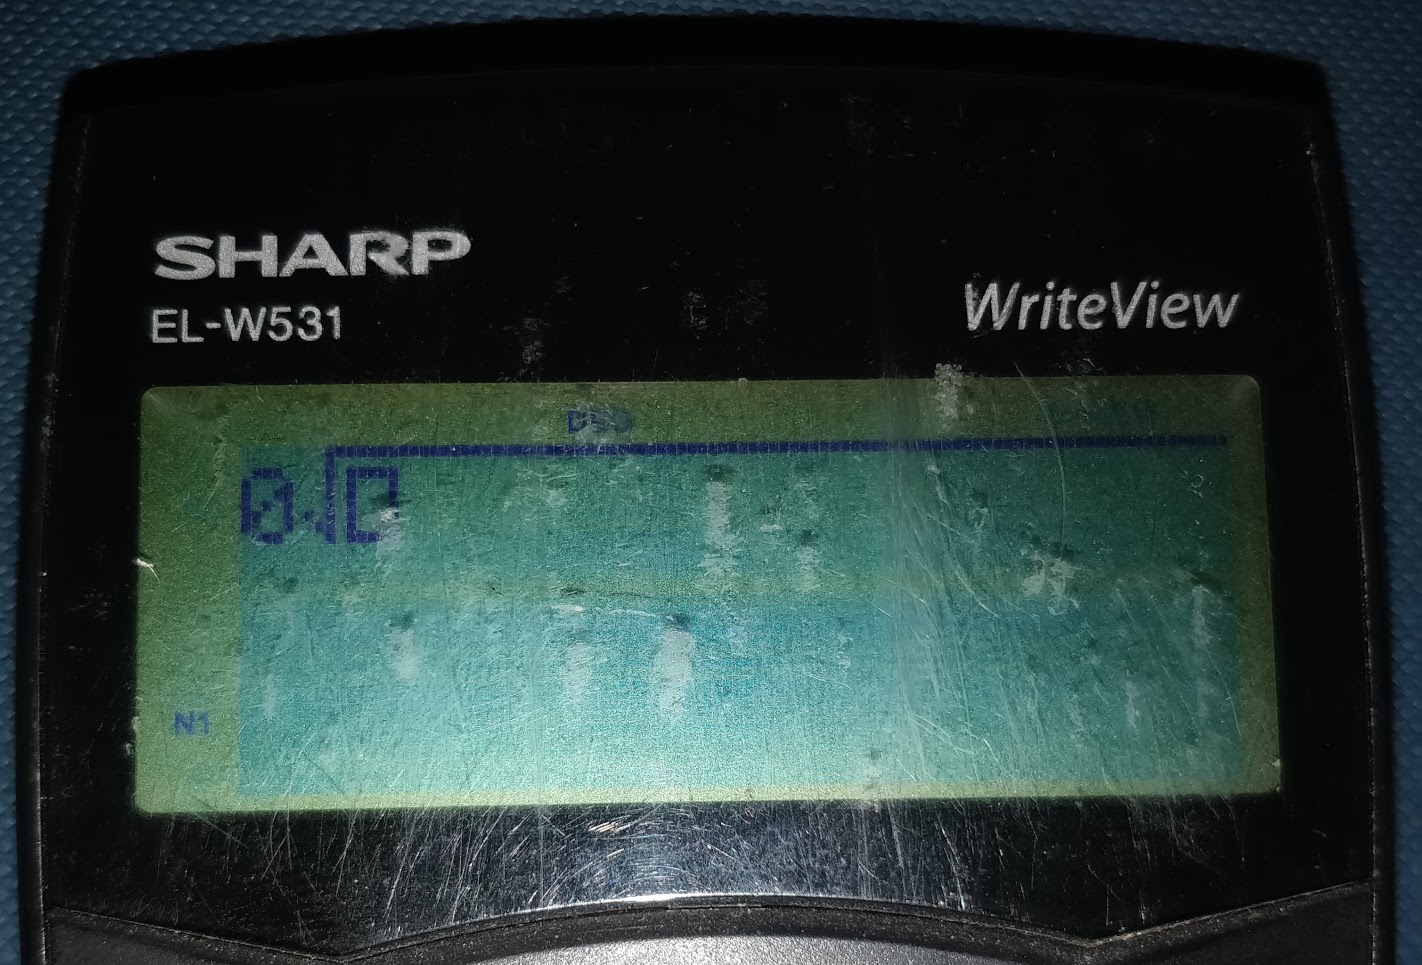 A photo of a calculator. It is showing '0, square root, box' however the bar of the square root that extends over what should be square rooted extends off the right side of the display.